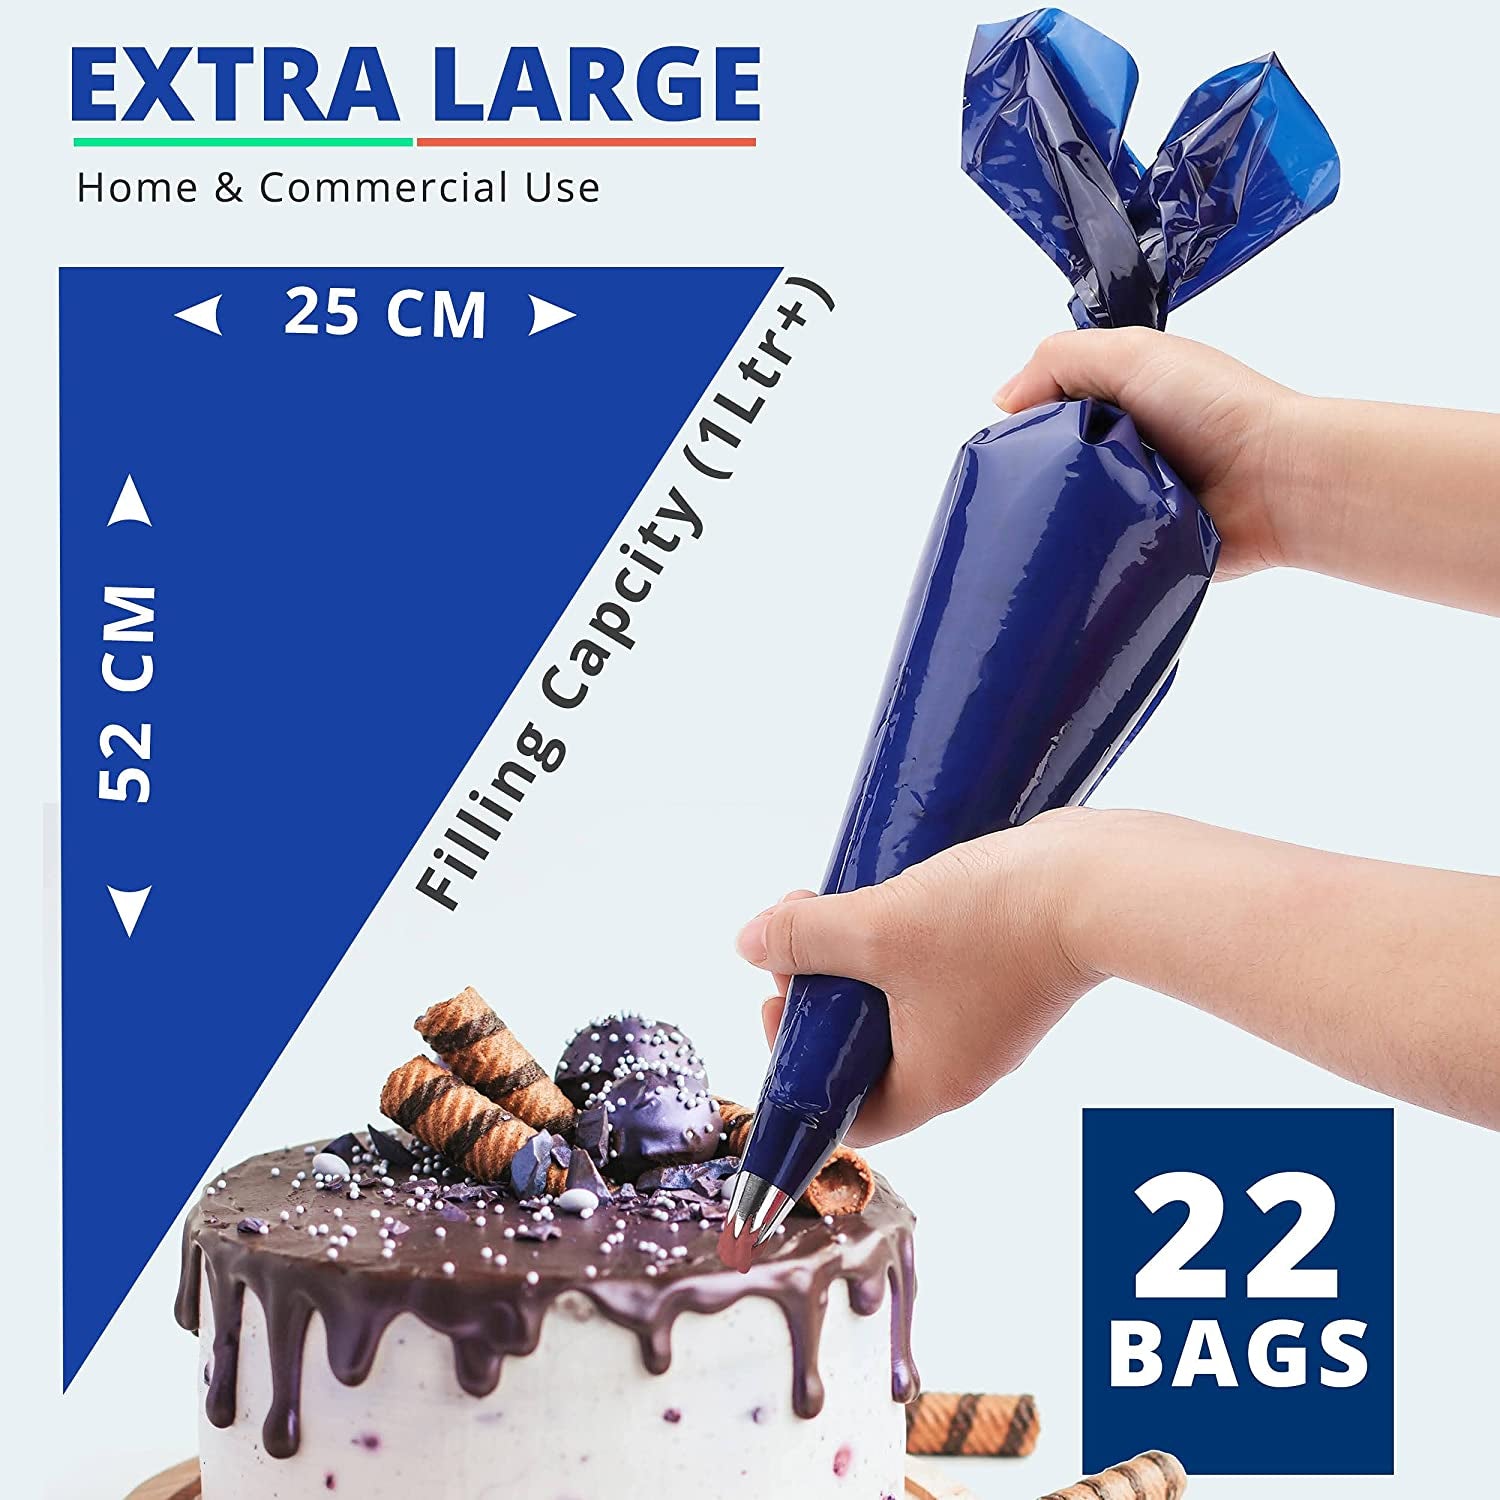 Large Disposable Piping Bags 21-Inch, Easy to Use Thick Icing Bags for Cake and Dessert Decorations, Easy to Tear off Roll of 22 Pcs